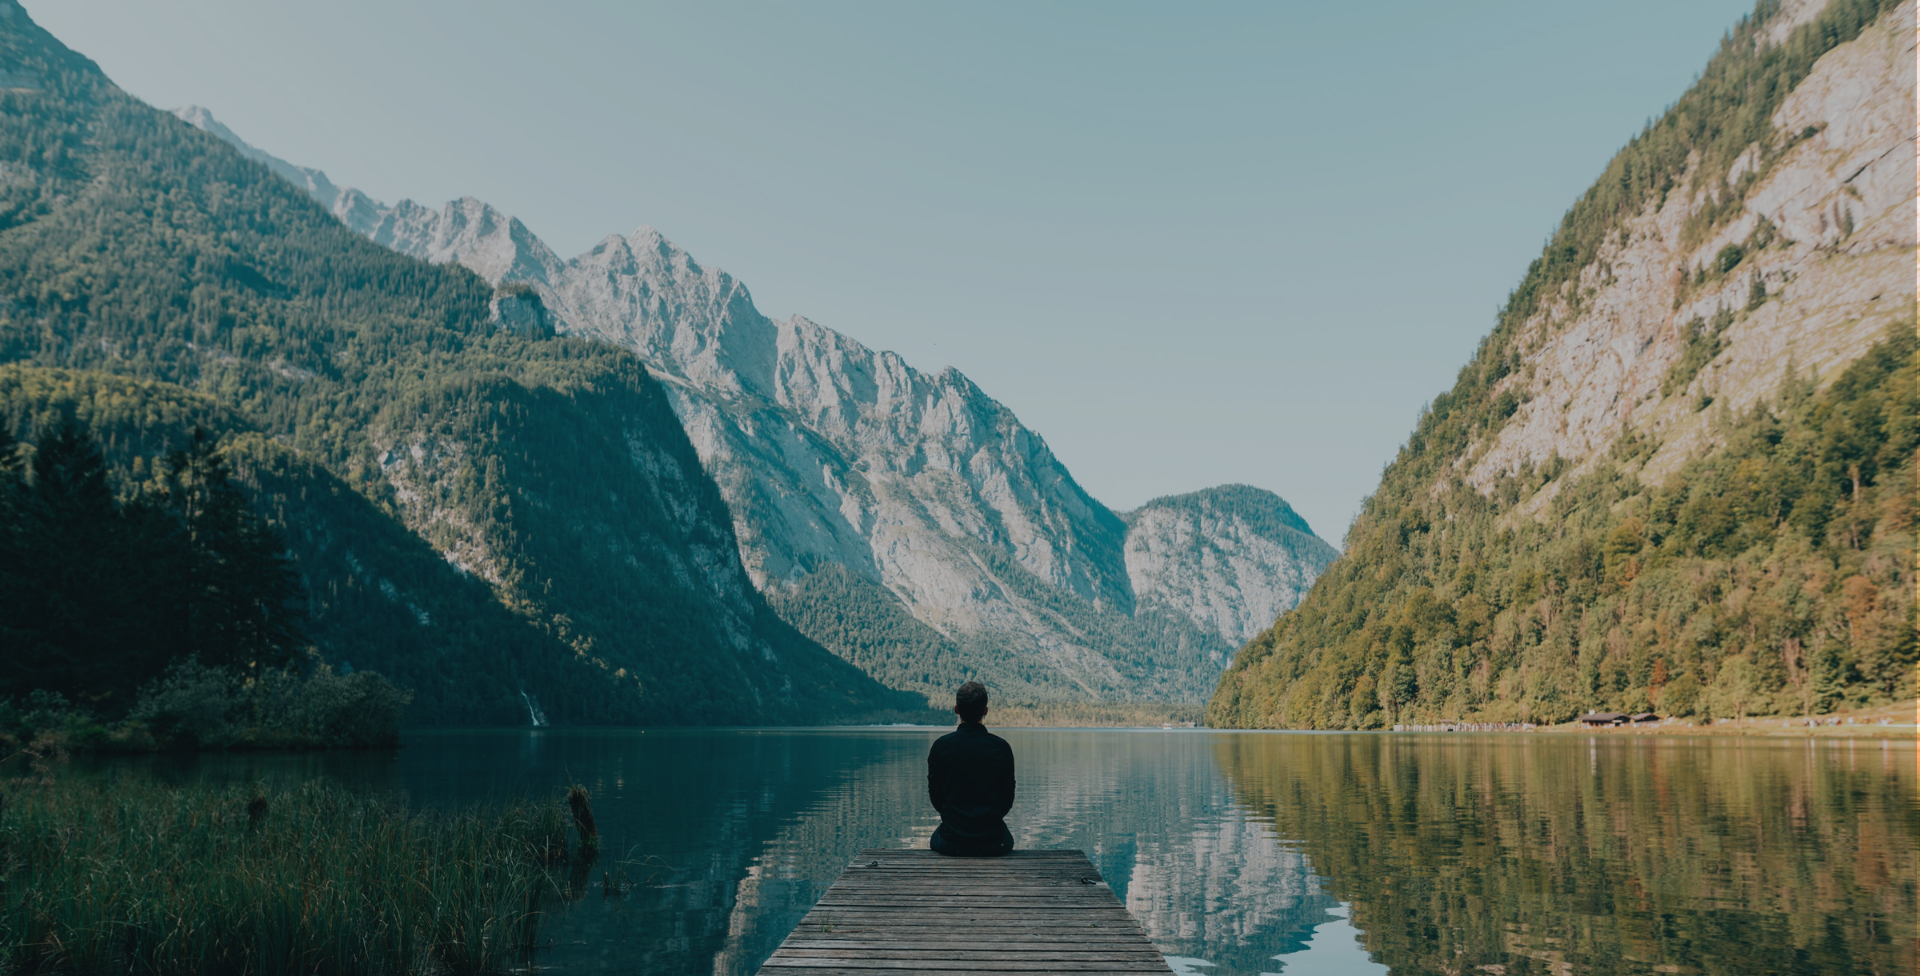 Man sitting at end of dock surrounded by nature